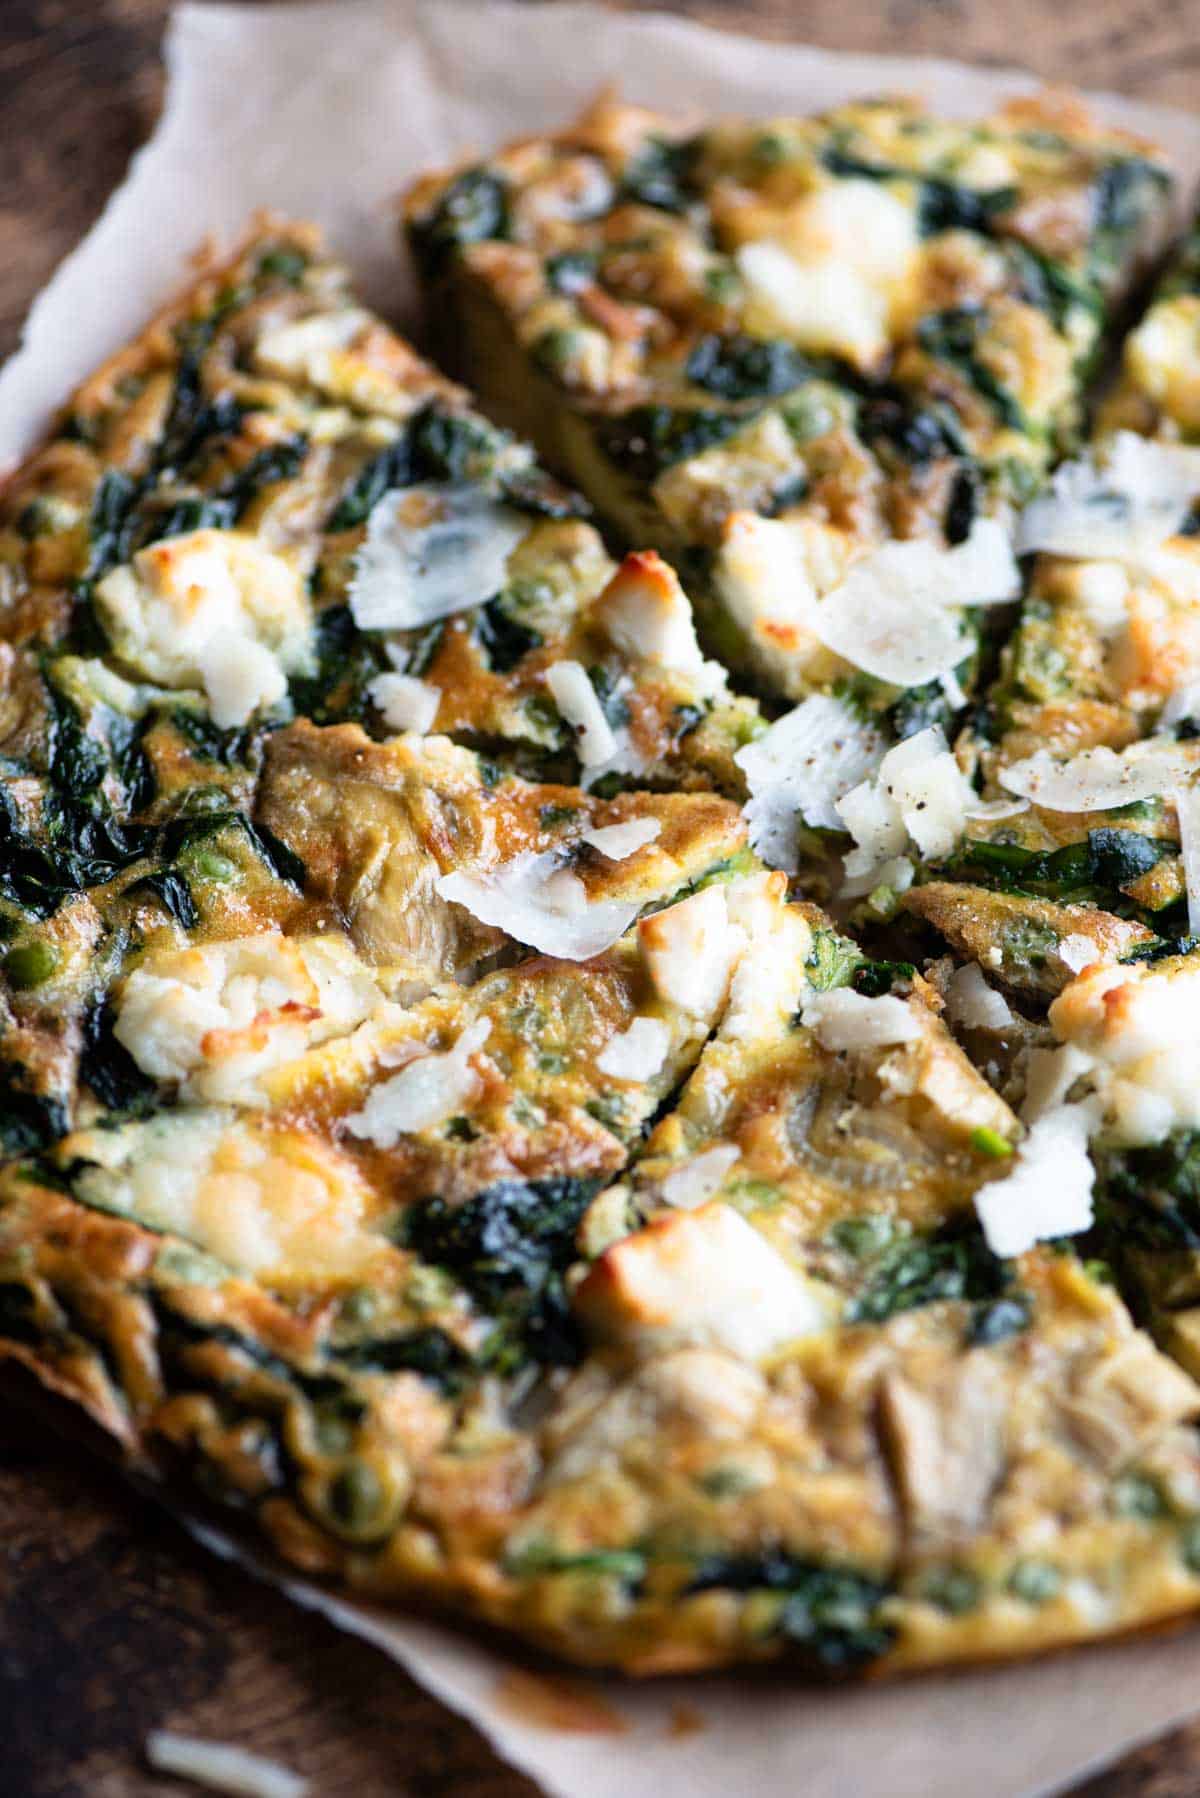 A close up of a spinach and artichoke frittata topped with goat's cheese cut into slices.